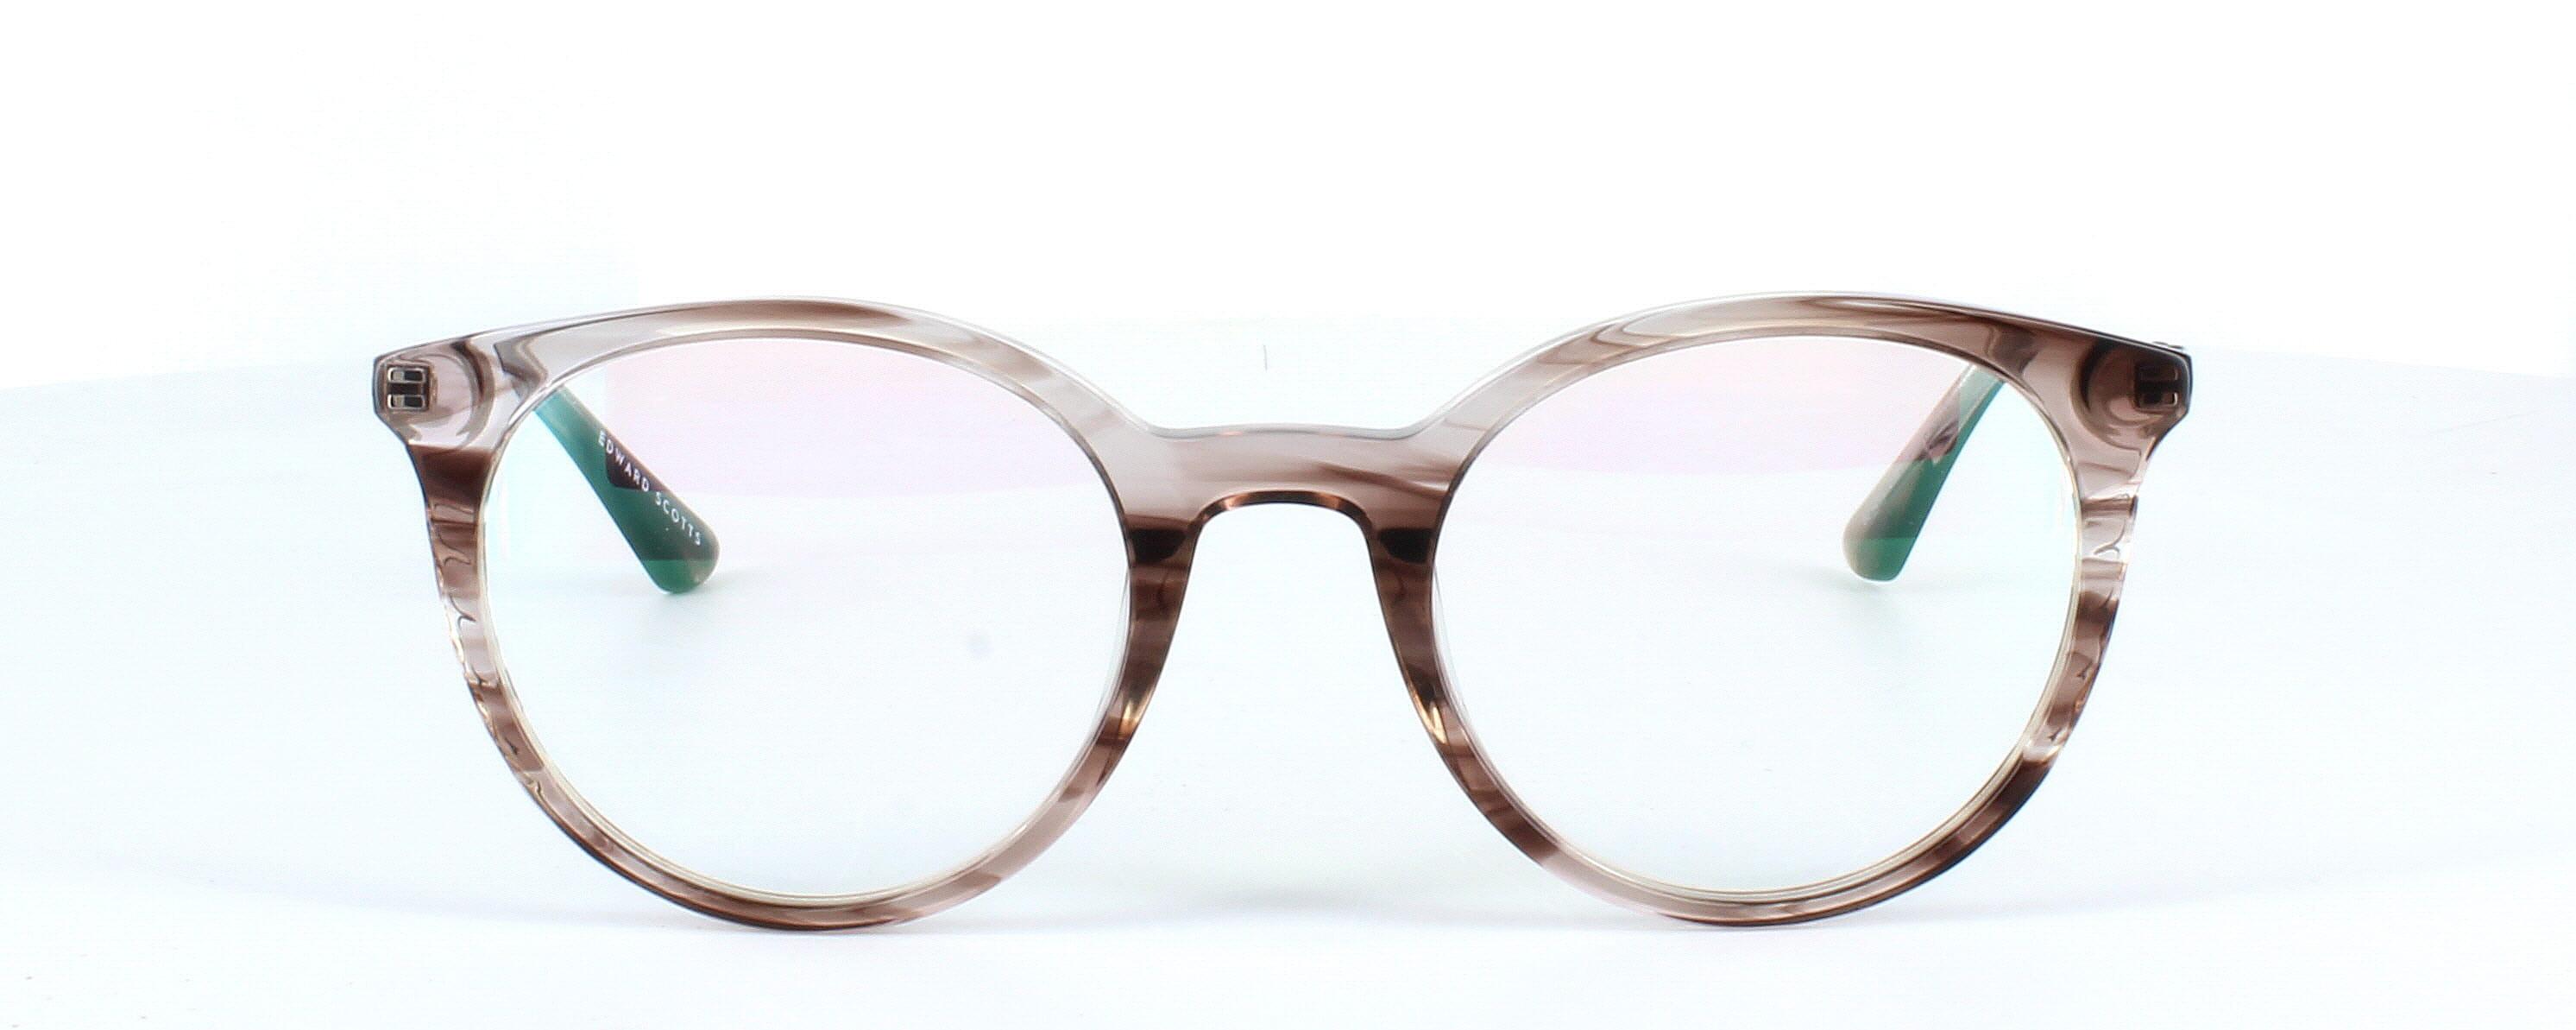 Edward Scotts BJ9211 - Brown -  Women's round shaped acetate with gold metal arms that are sprung hinged at the temples - image view 2